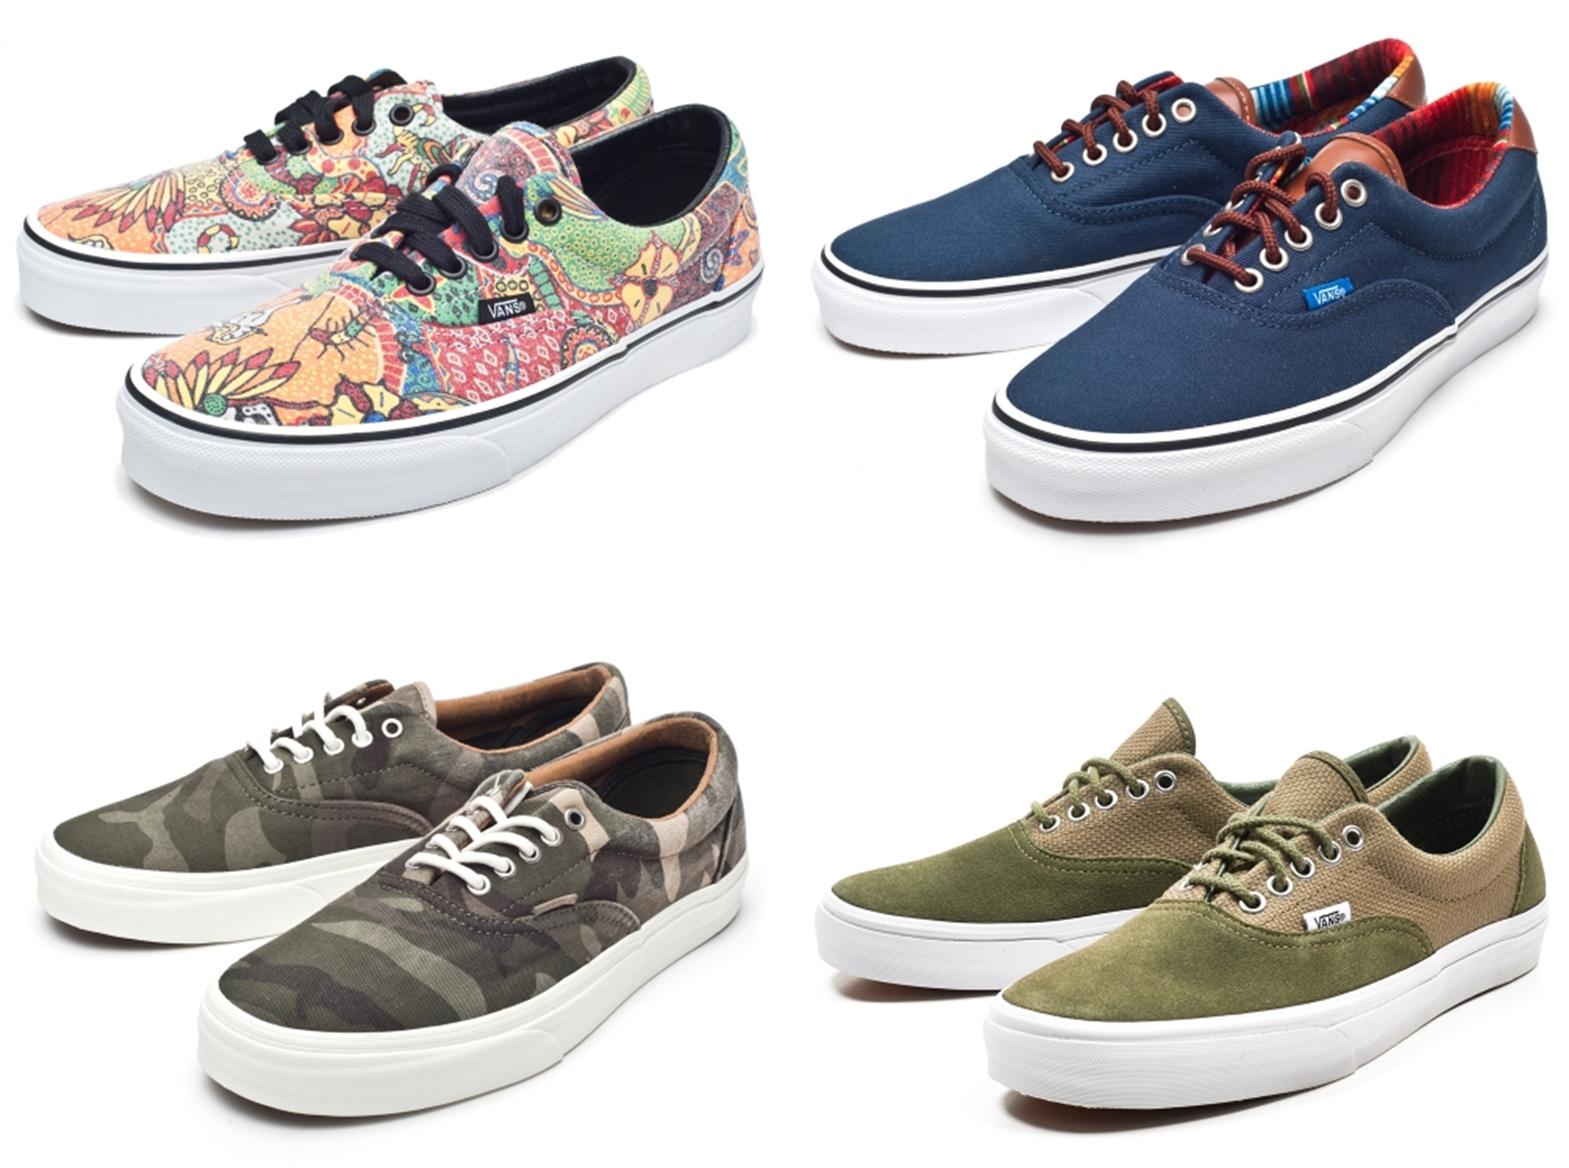 Vans shoes on OLOW's E-shop - Olow Trademark - Art, Escape \u0026 Poetry